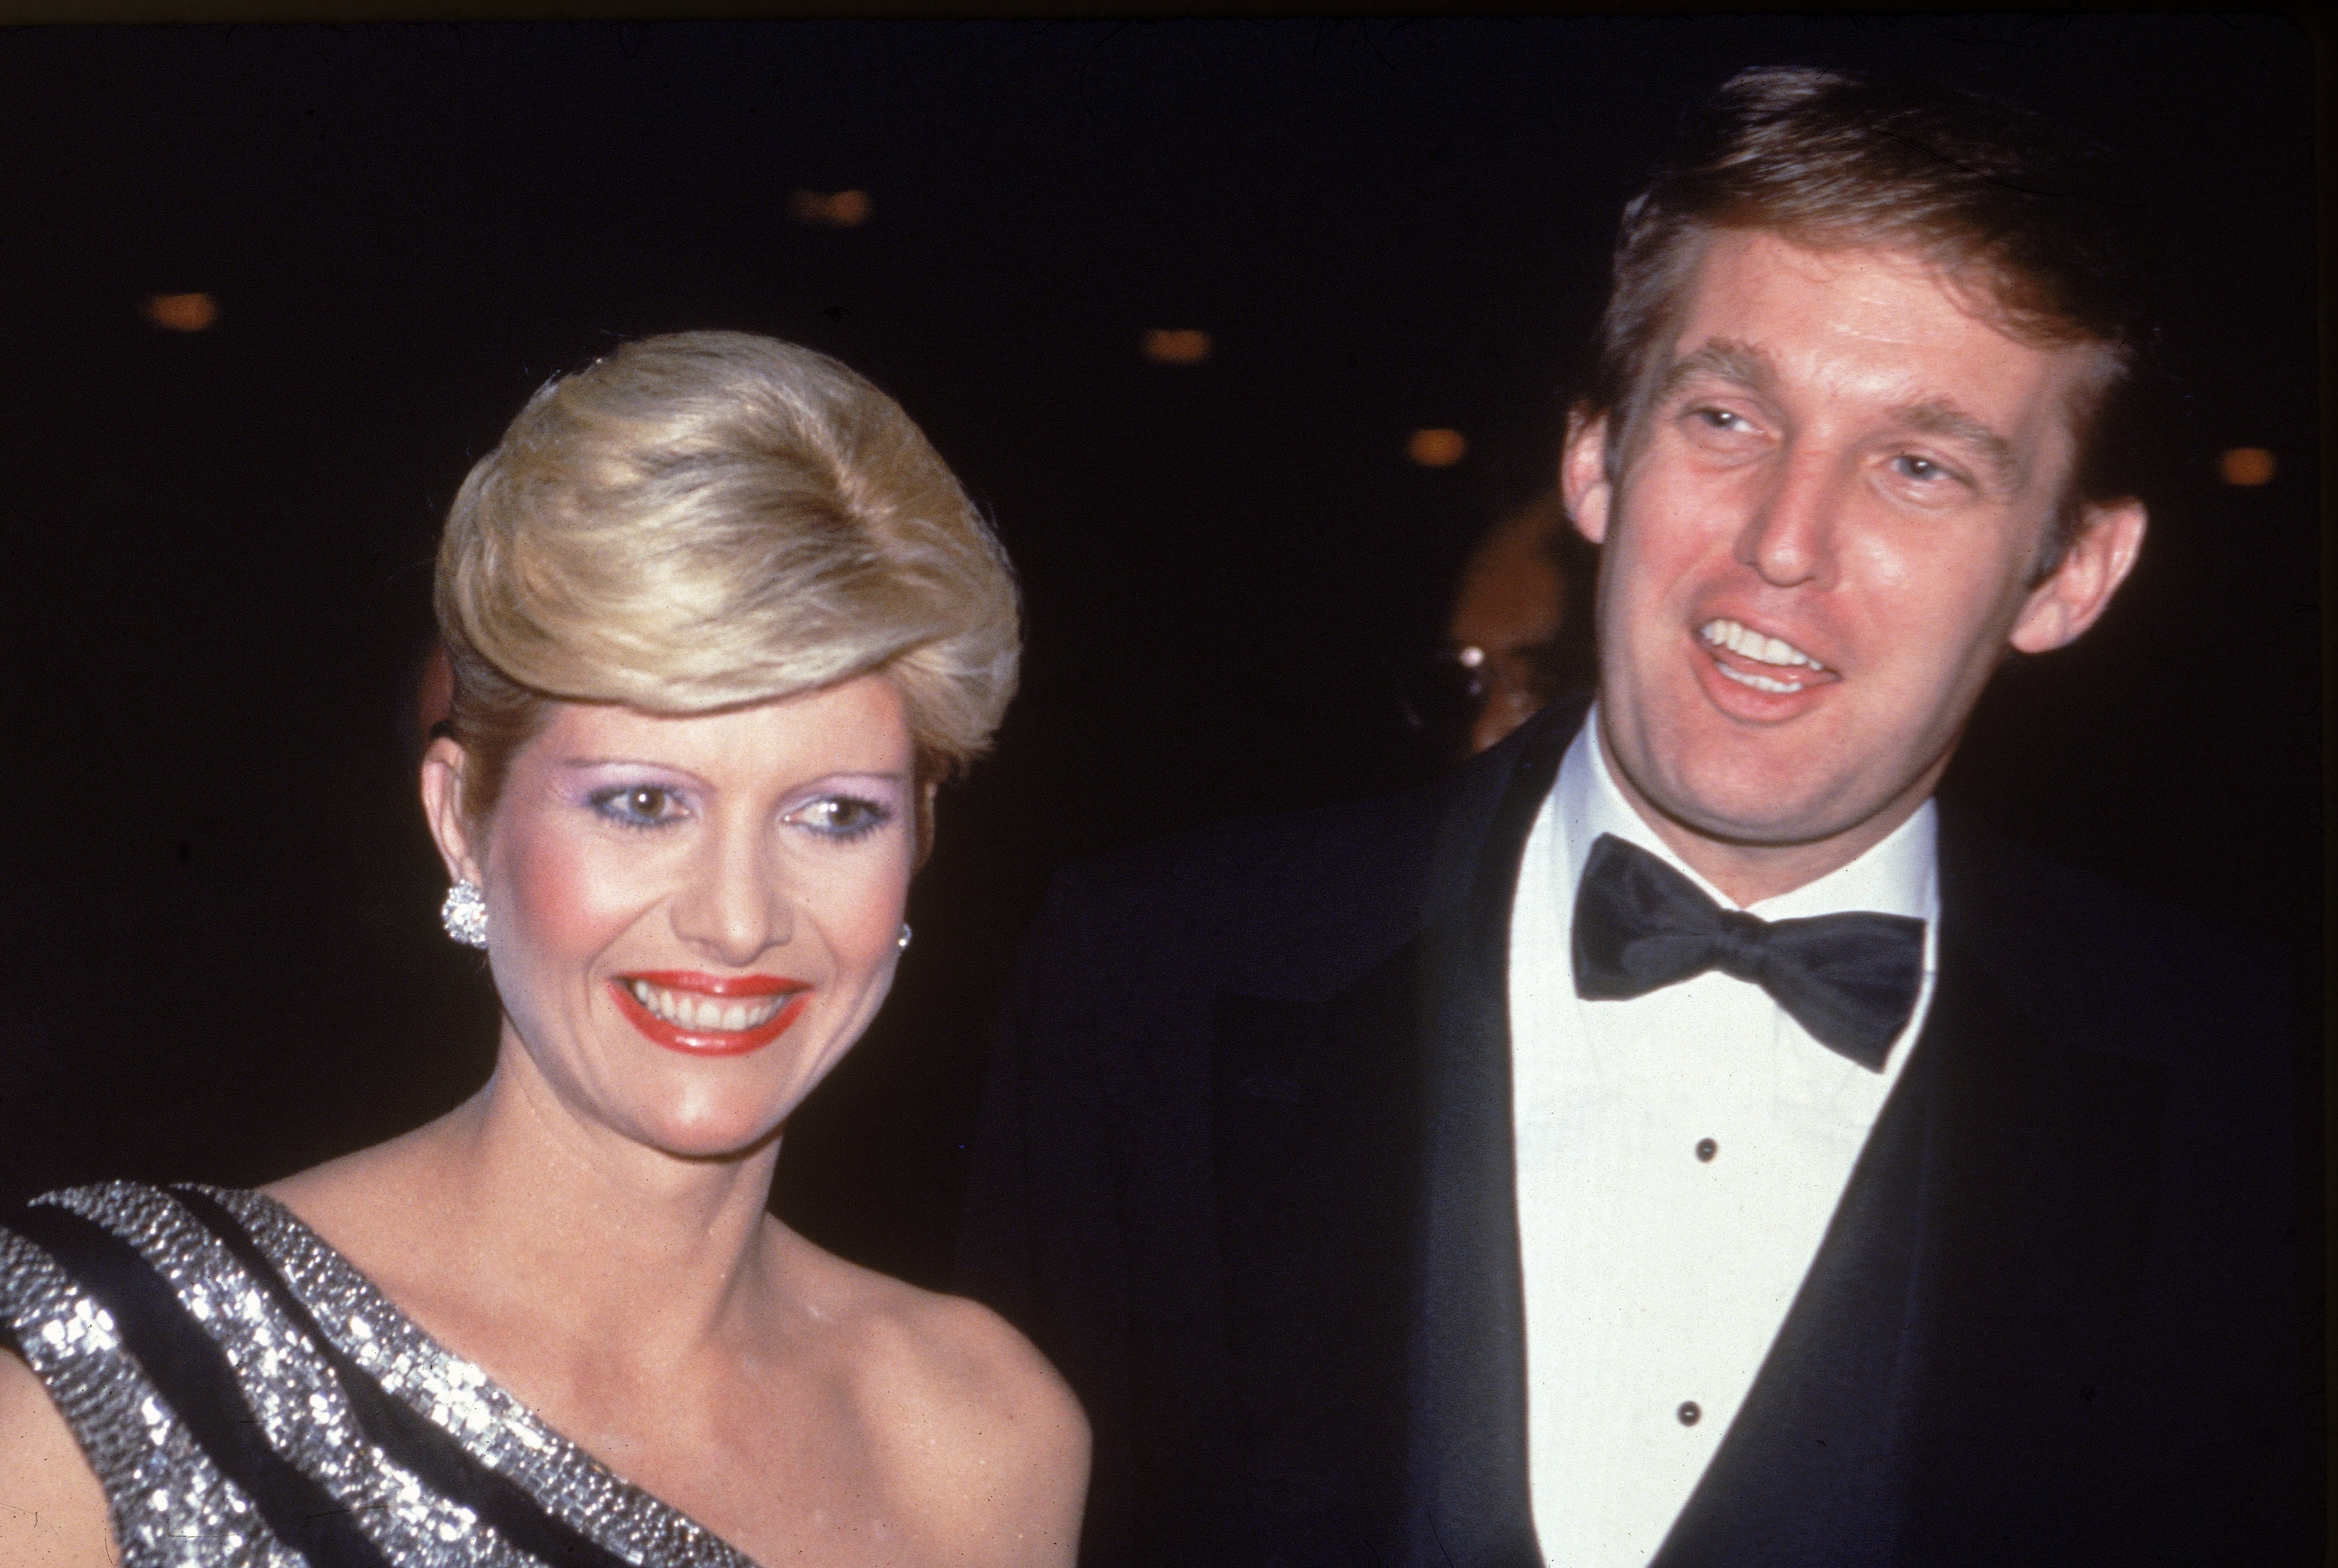 Donald Trump and his wife Ivana at a formal party in 1982 | Photo: Tom Gates/Getty Images